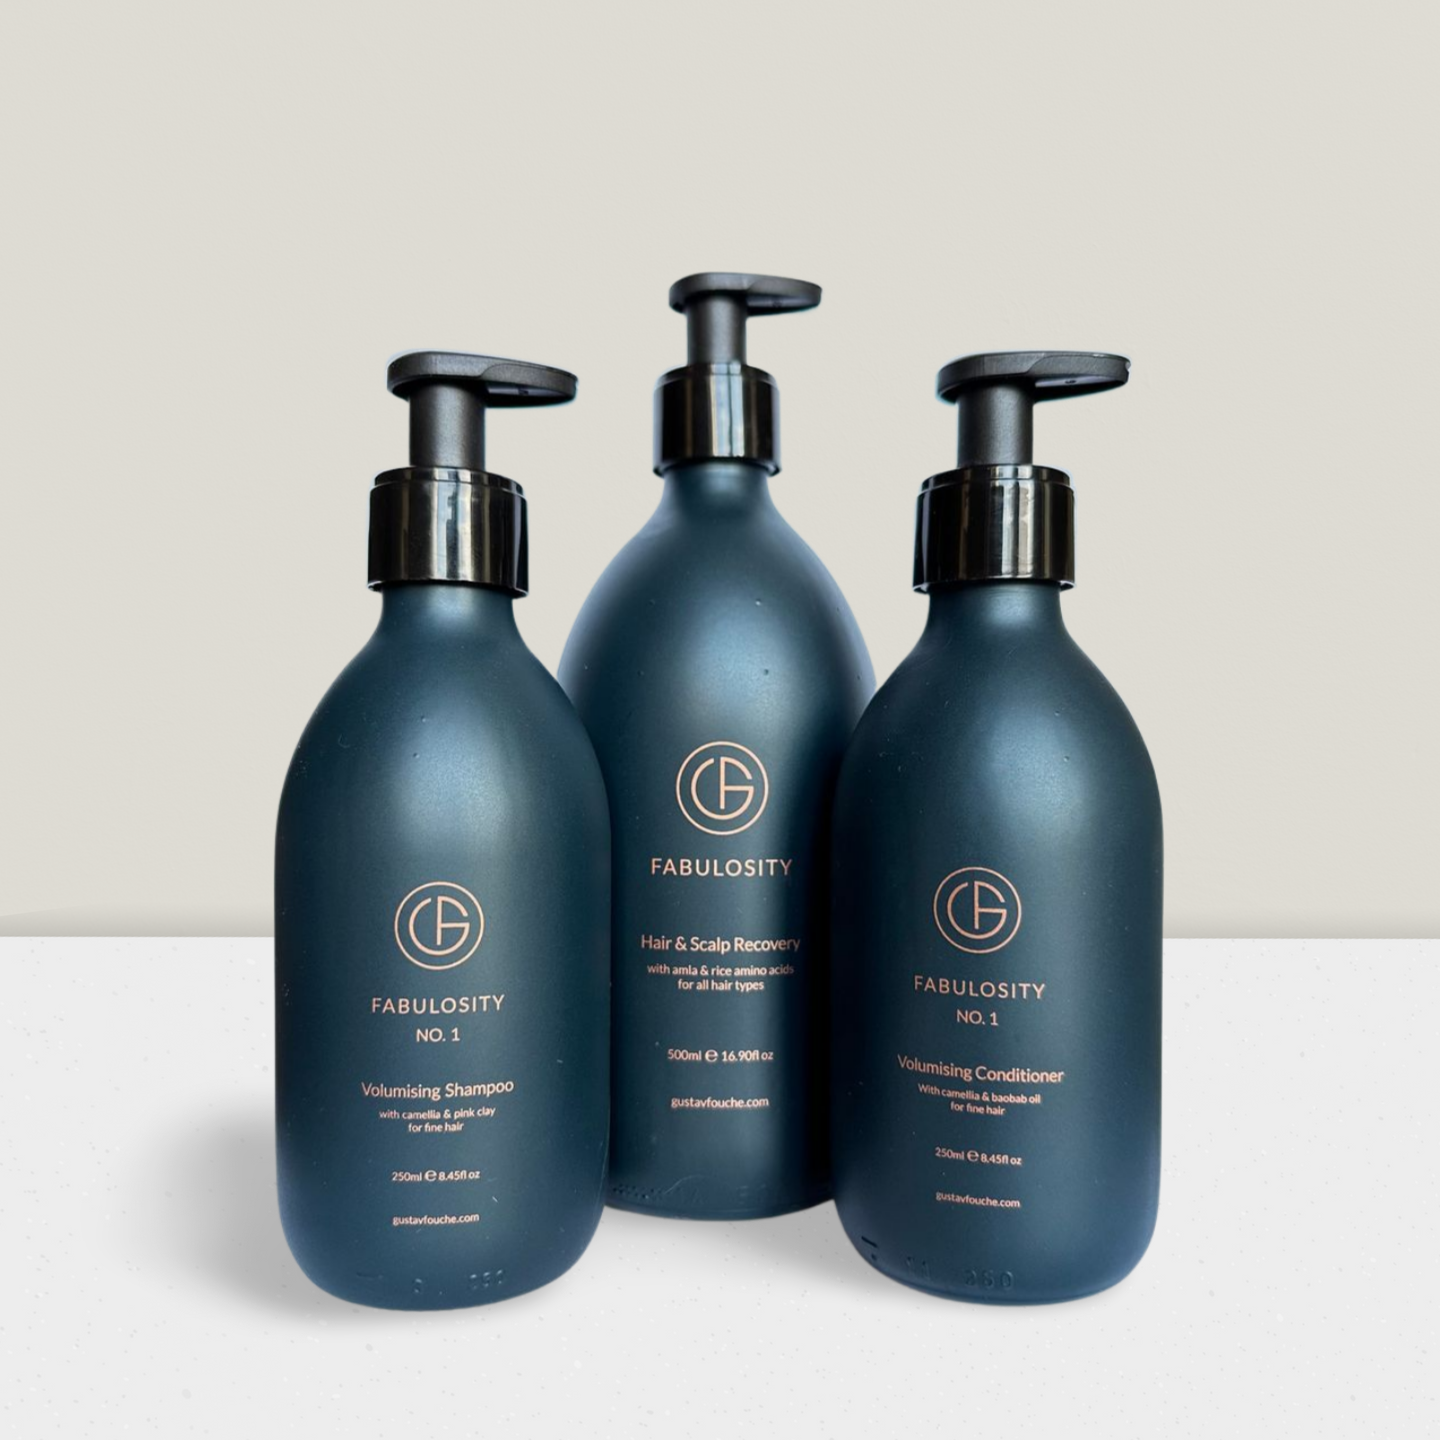 GF Fabulosity - Volumising Shampoo and Conditioner with Recovery Elixir Treatment